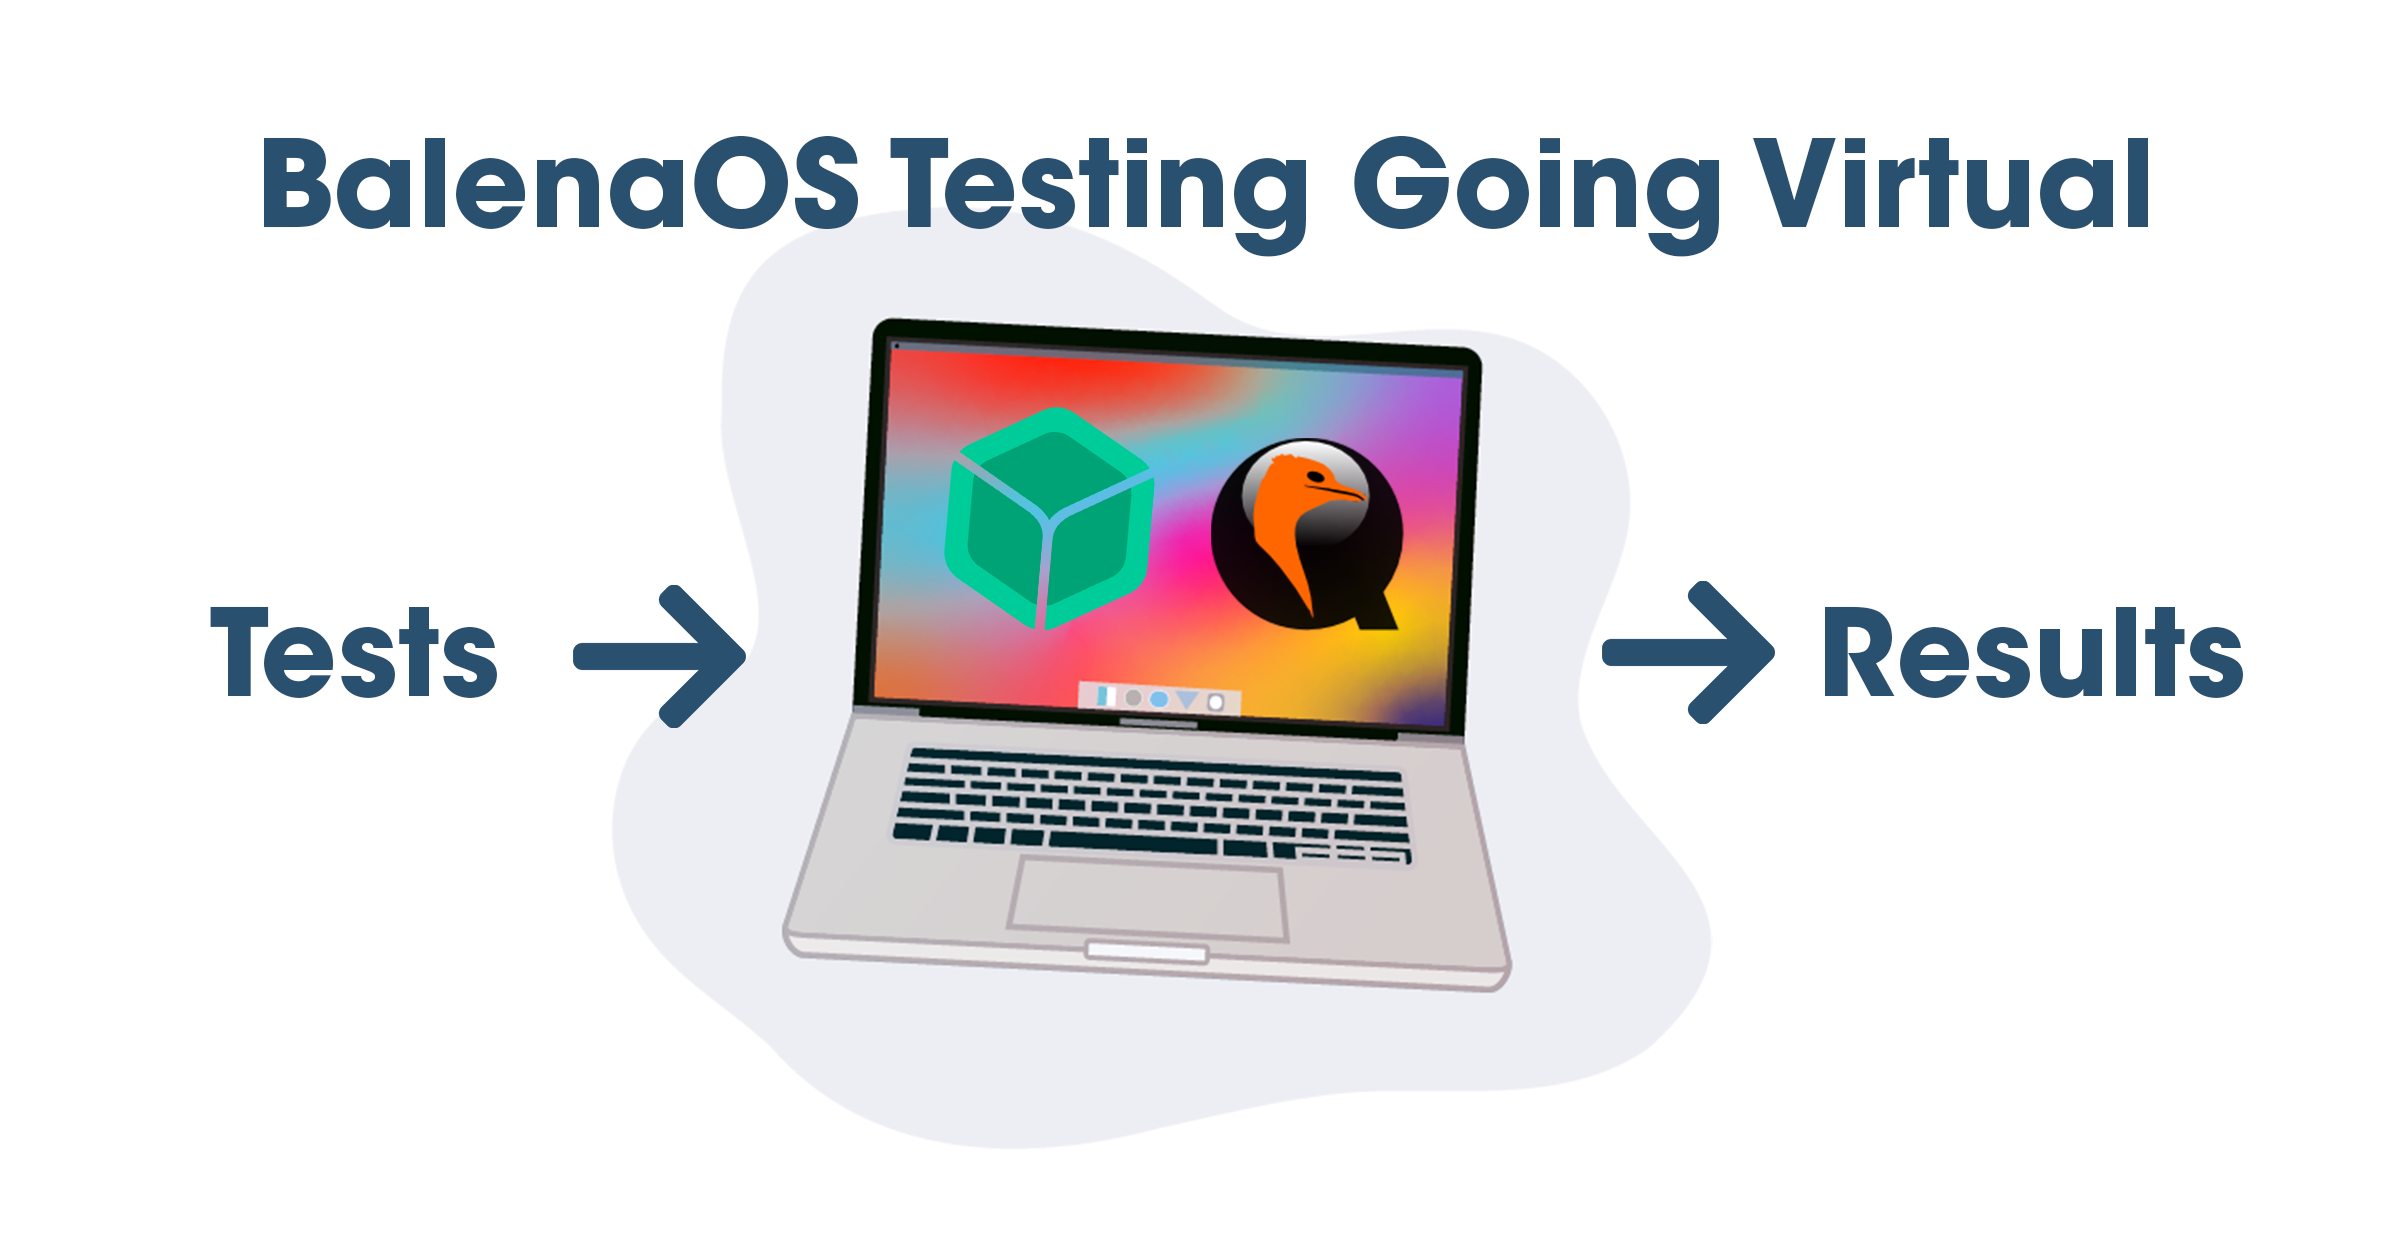 Maximizing Resources in the Chip Shortage: How balenaOS Testing went Virtual